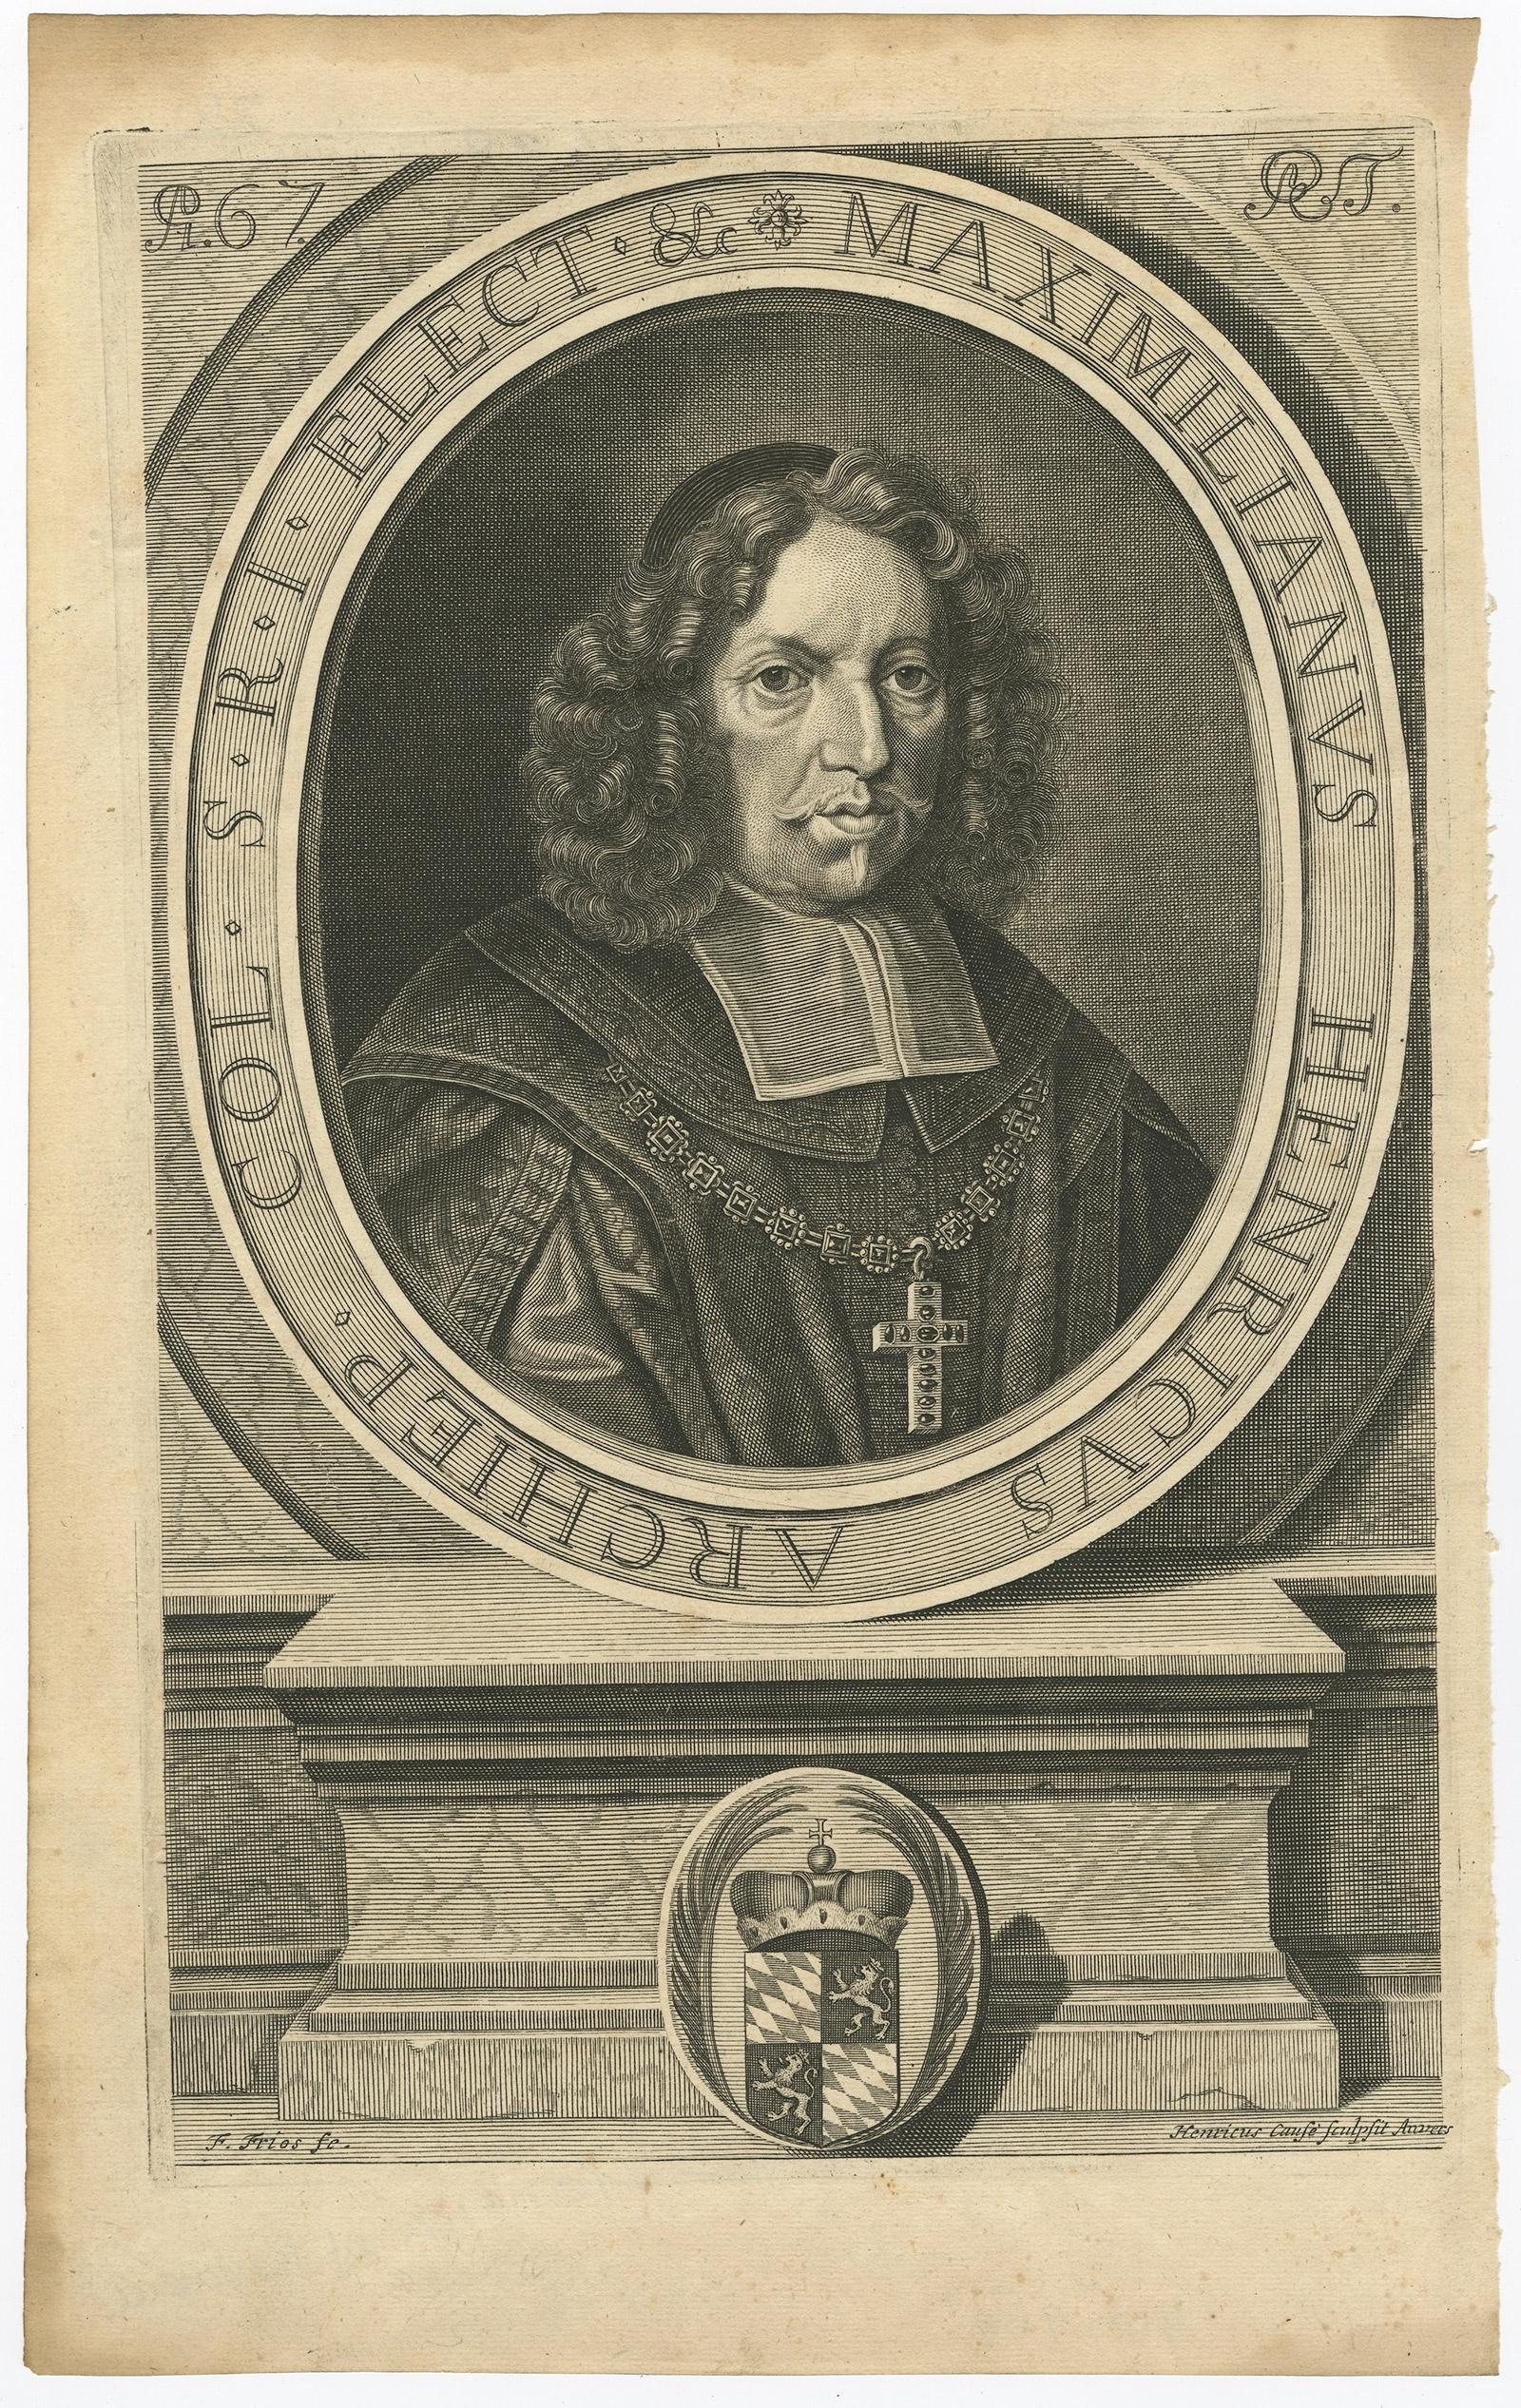 Antique print, titled: 'Maximilianus Henricus (…)' 

Portrait of Maximilian Henry of Bavaria (1621 - 1688). He was the third son and fourth child of Albert VI, landgrave of Leuchtenberg and his wife, Mechthilde von Leuchtenberg. In 1650, he was